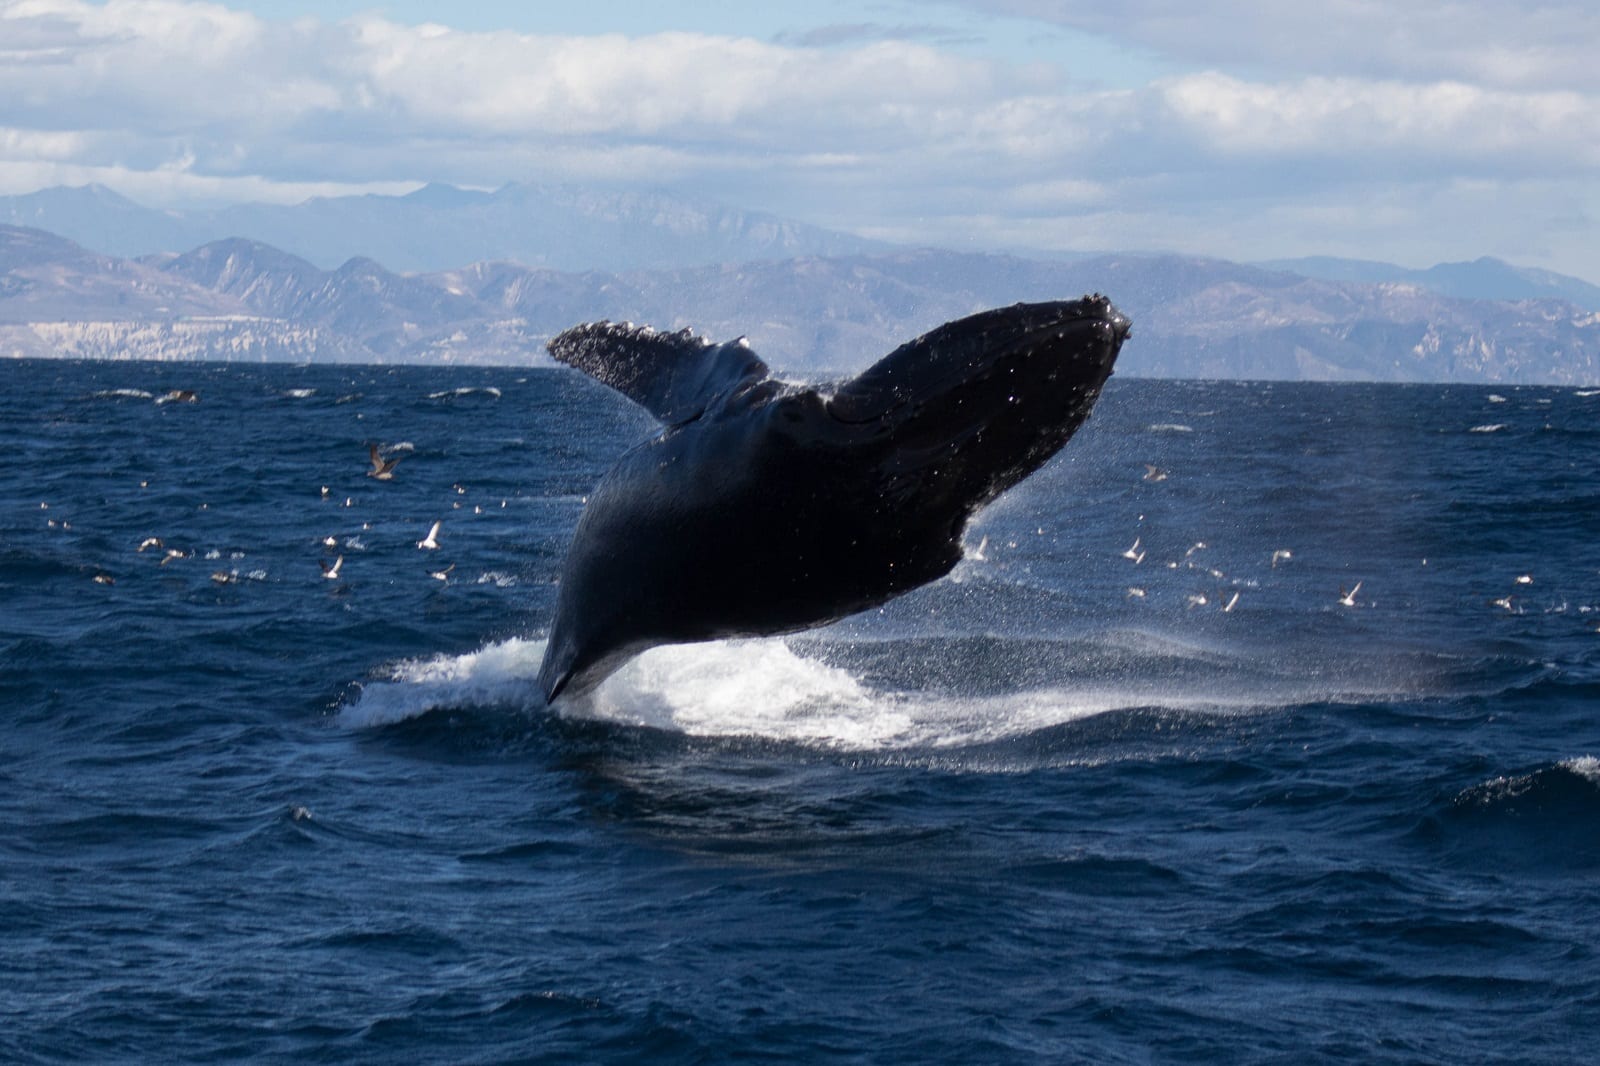 <p><span>Begin your Santa Barbara adventure with a whale-watching tour. The Pacific waters here are a playground for migrating whales, offering a humbling and exhilarating spectacle. As you set sail into the ocean, keep your eyes peeled for the majestic humpback, blue, and gray whales, and if you’re lucky, the elusive killer whales.</span></p> <p><b>Insider’s Tip: </b><span>Choose a smaller boat tour for a more intimate and closer view of the whales.</span></p>